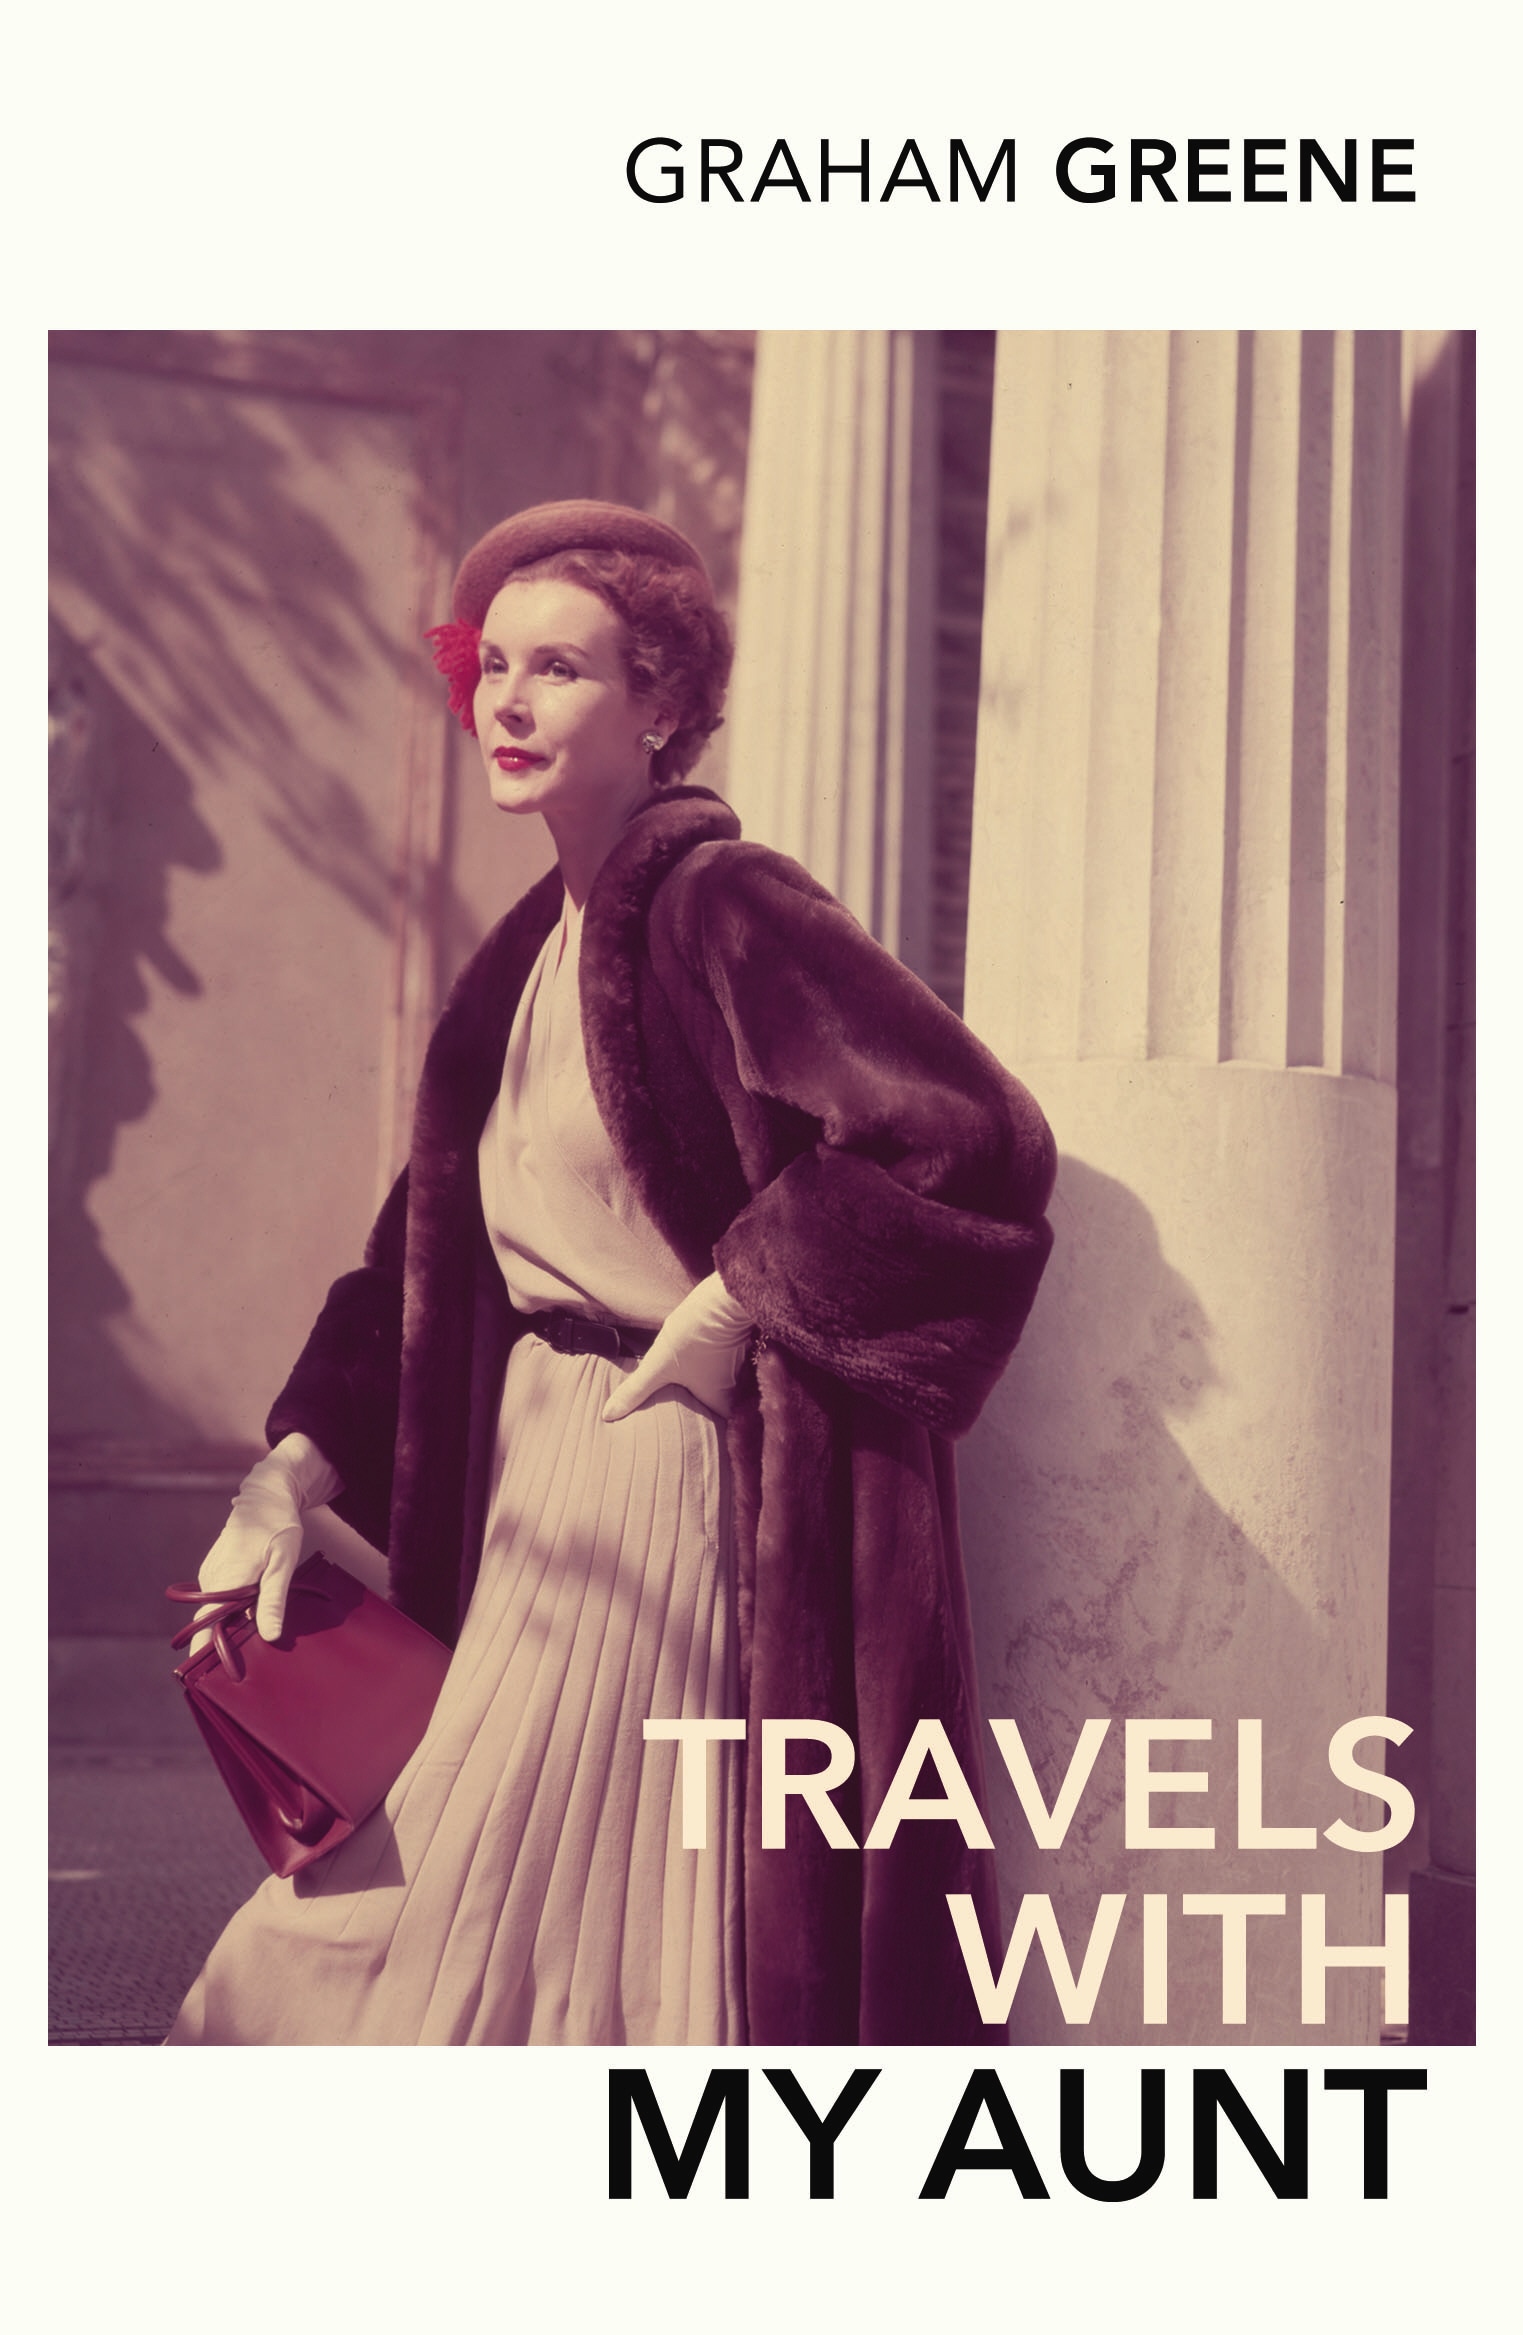 Book “Travels With My Aunt” by Graham Greene — September 2, 1999